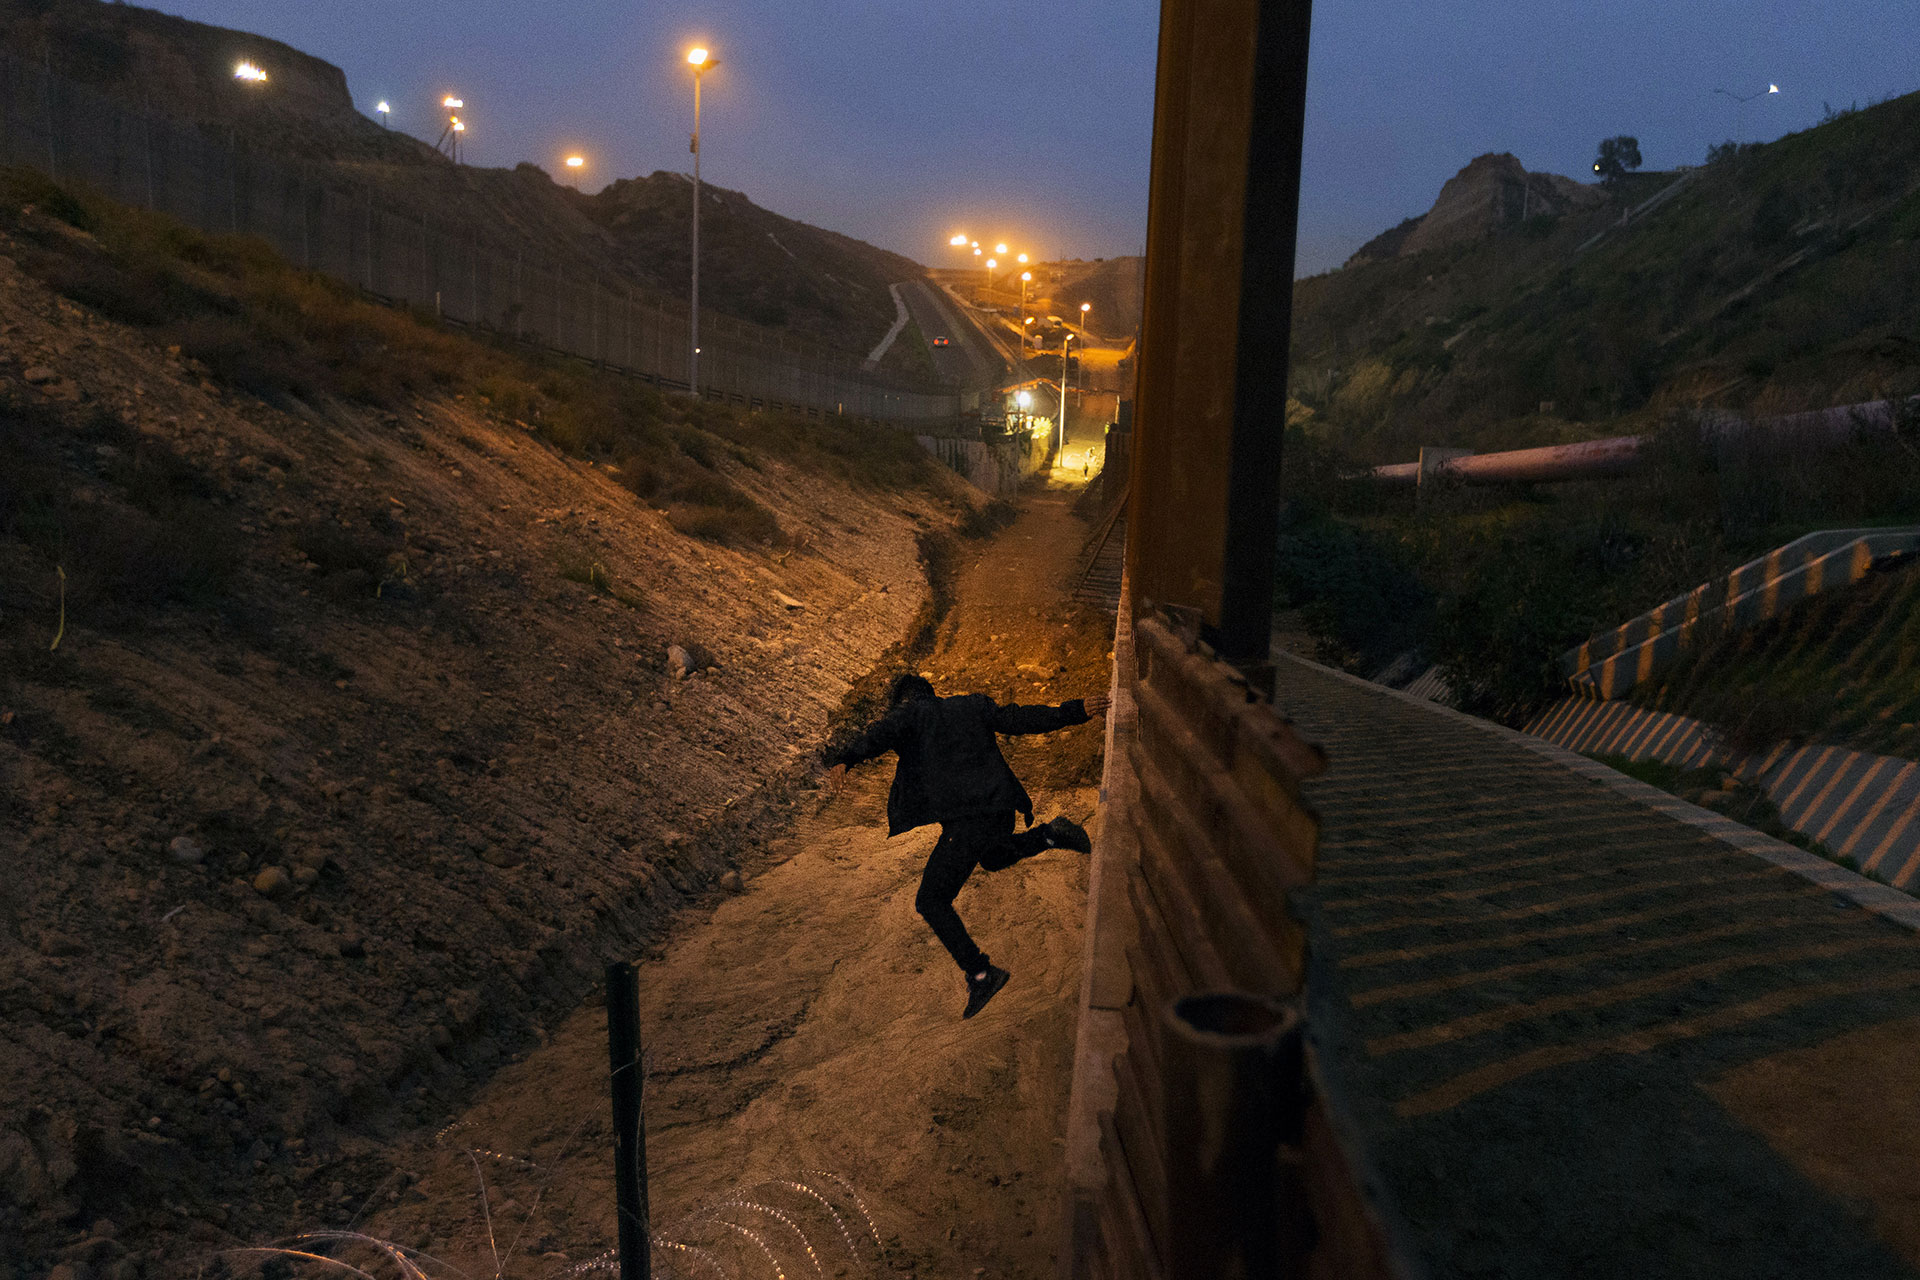 A Honduran migrant jumps from the U.S. border fence in Tijuana, Mexico on 21 December 2018.